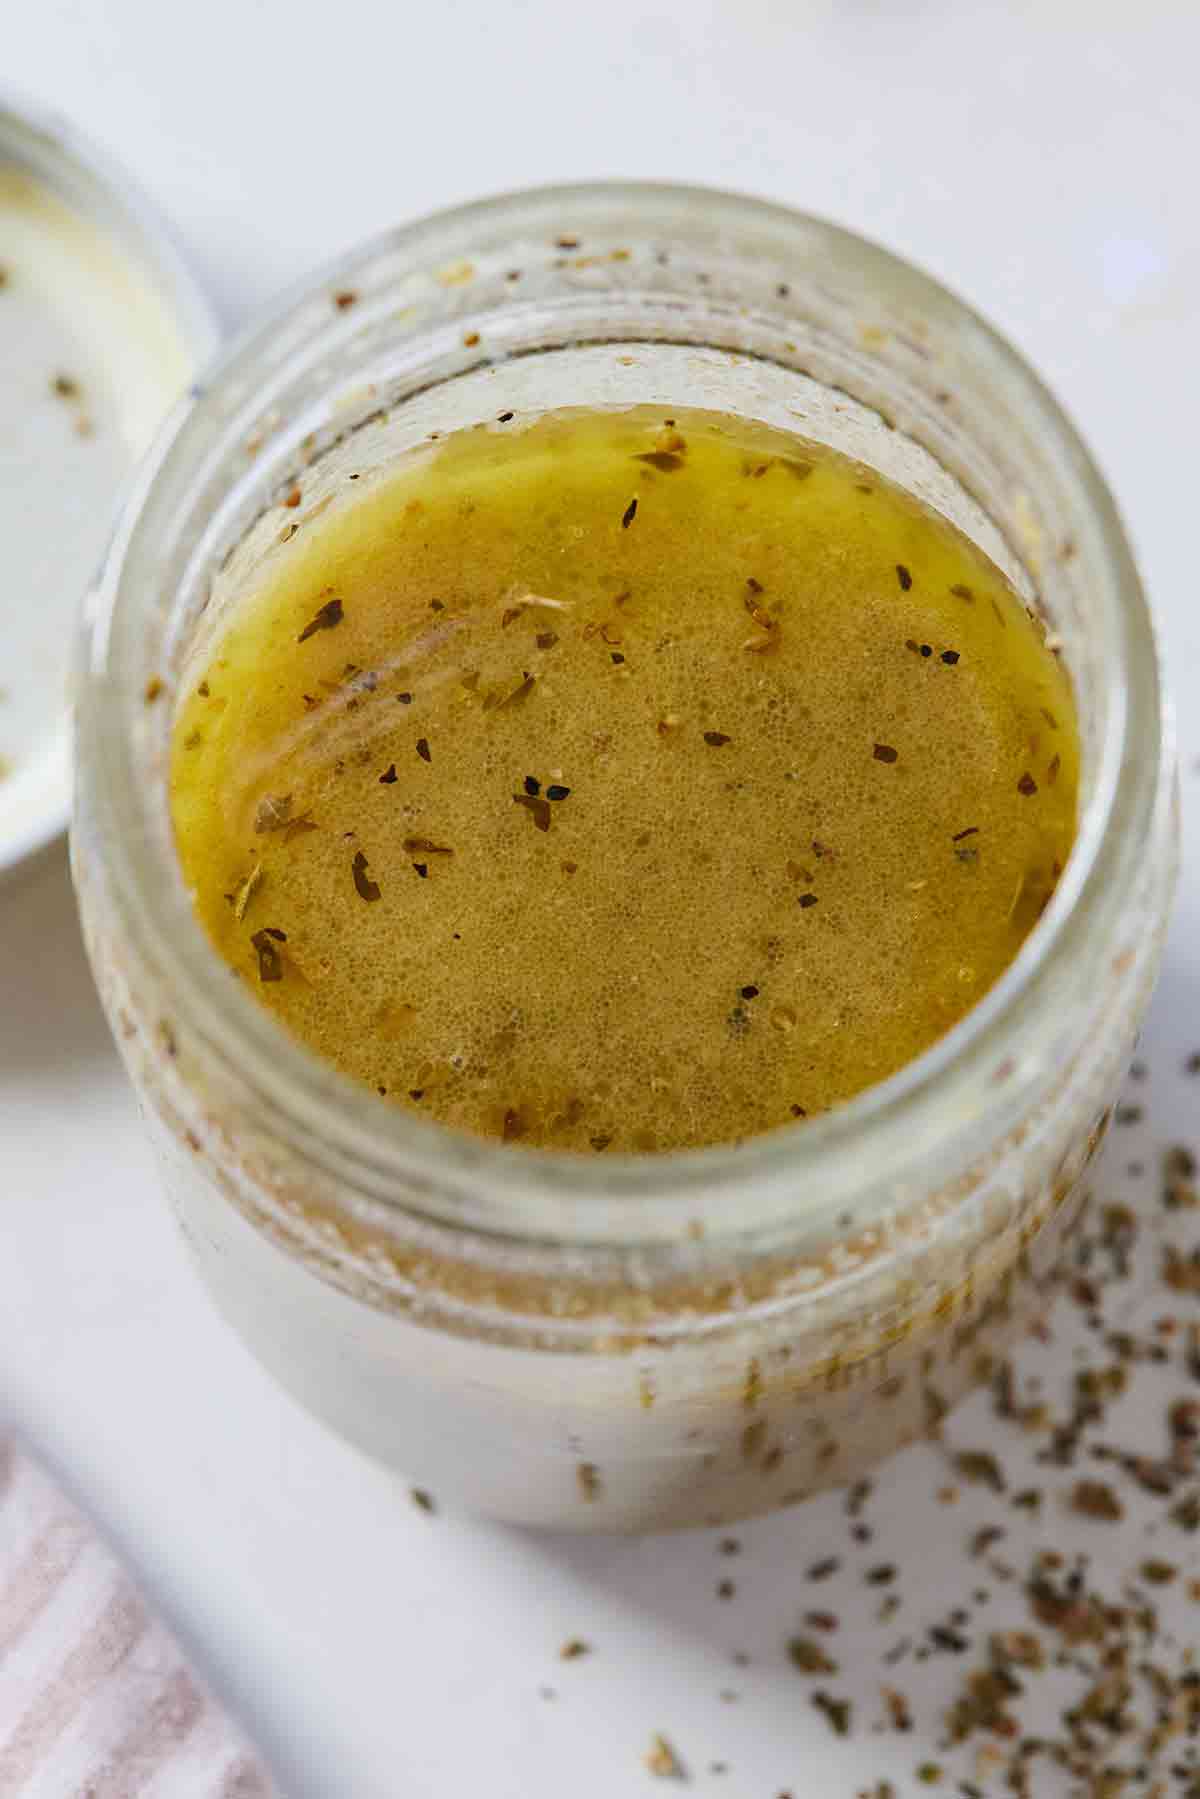 Overhead view of a mason jar of red wine vinaigrette with oregano sprinkled around the counter.